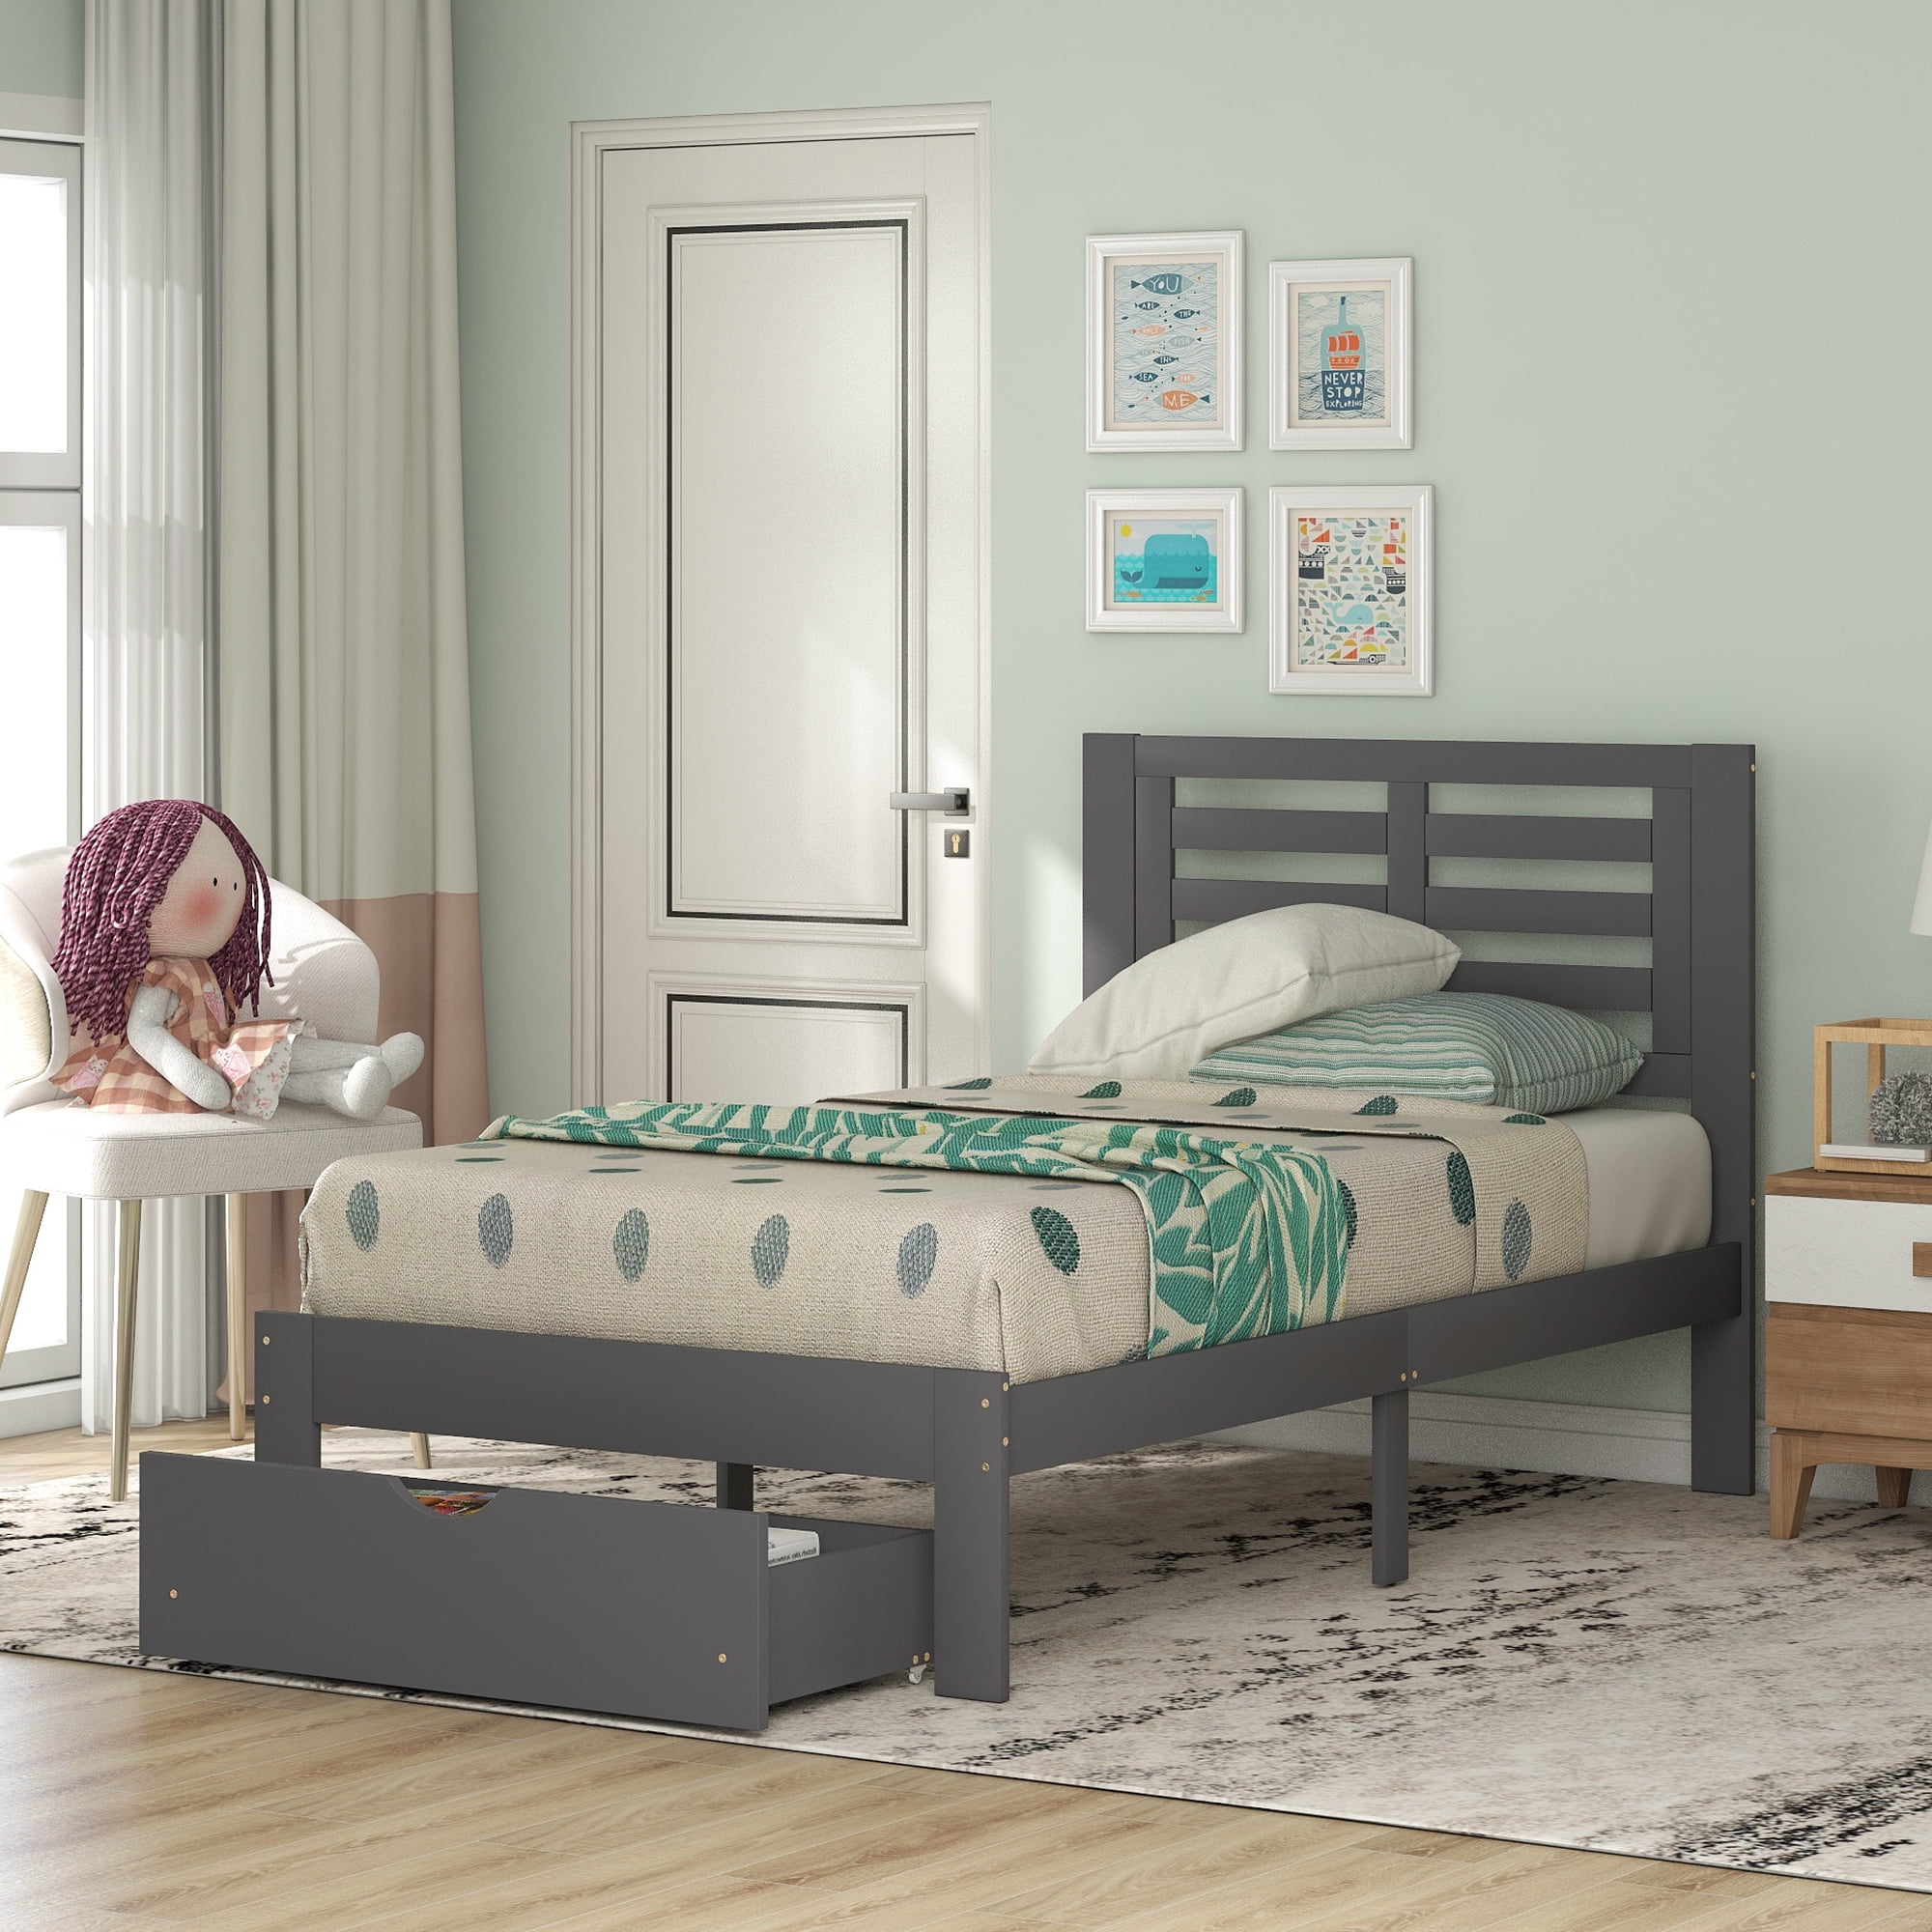 Twin Bed Frame For Kids S Upgrade, Pine Twin Bed With Storage Drawers